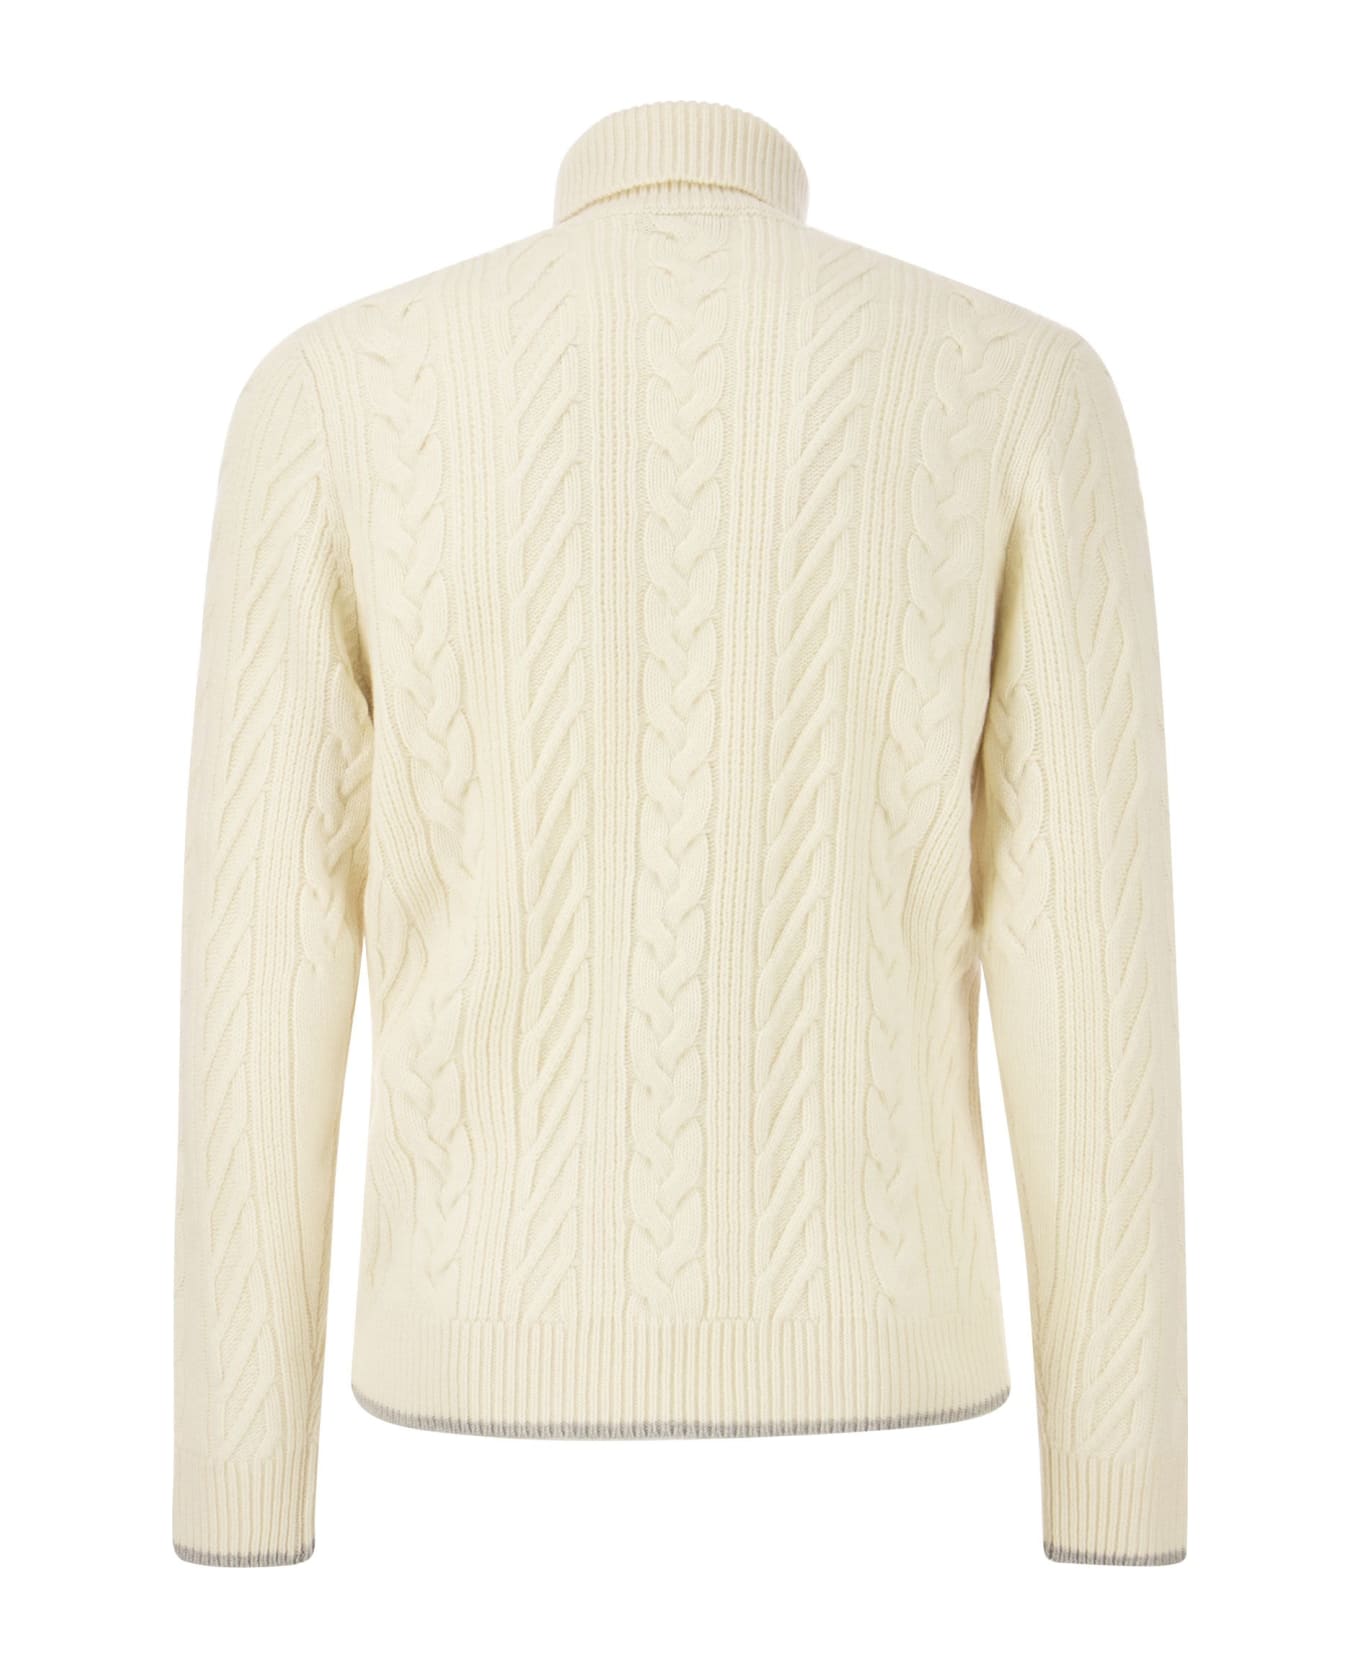 Peserico Wool And Cashmere Cable-knit Turtleneck Sweater - Cream ニットウェア